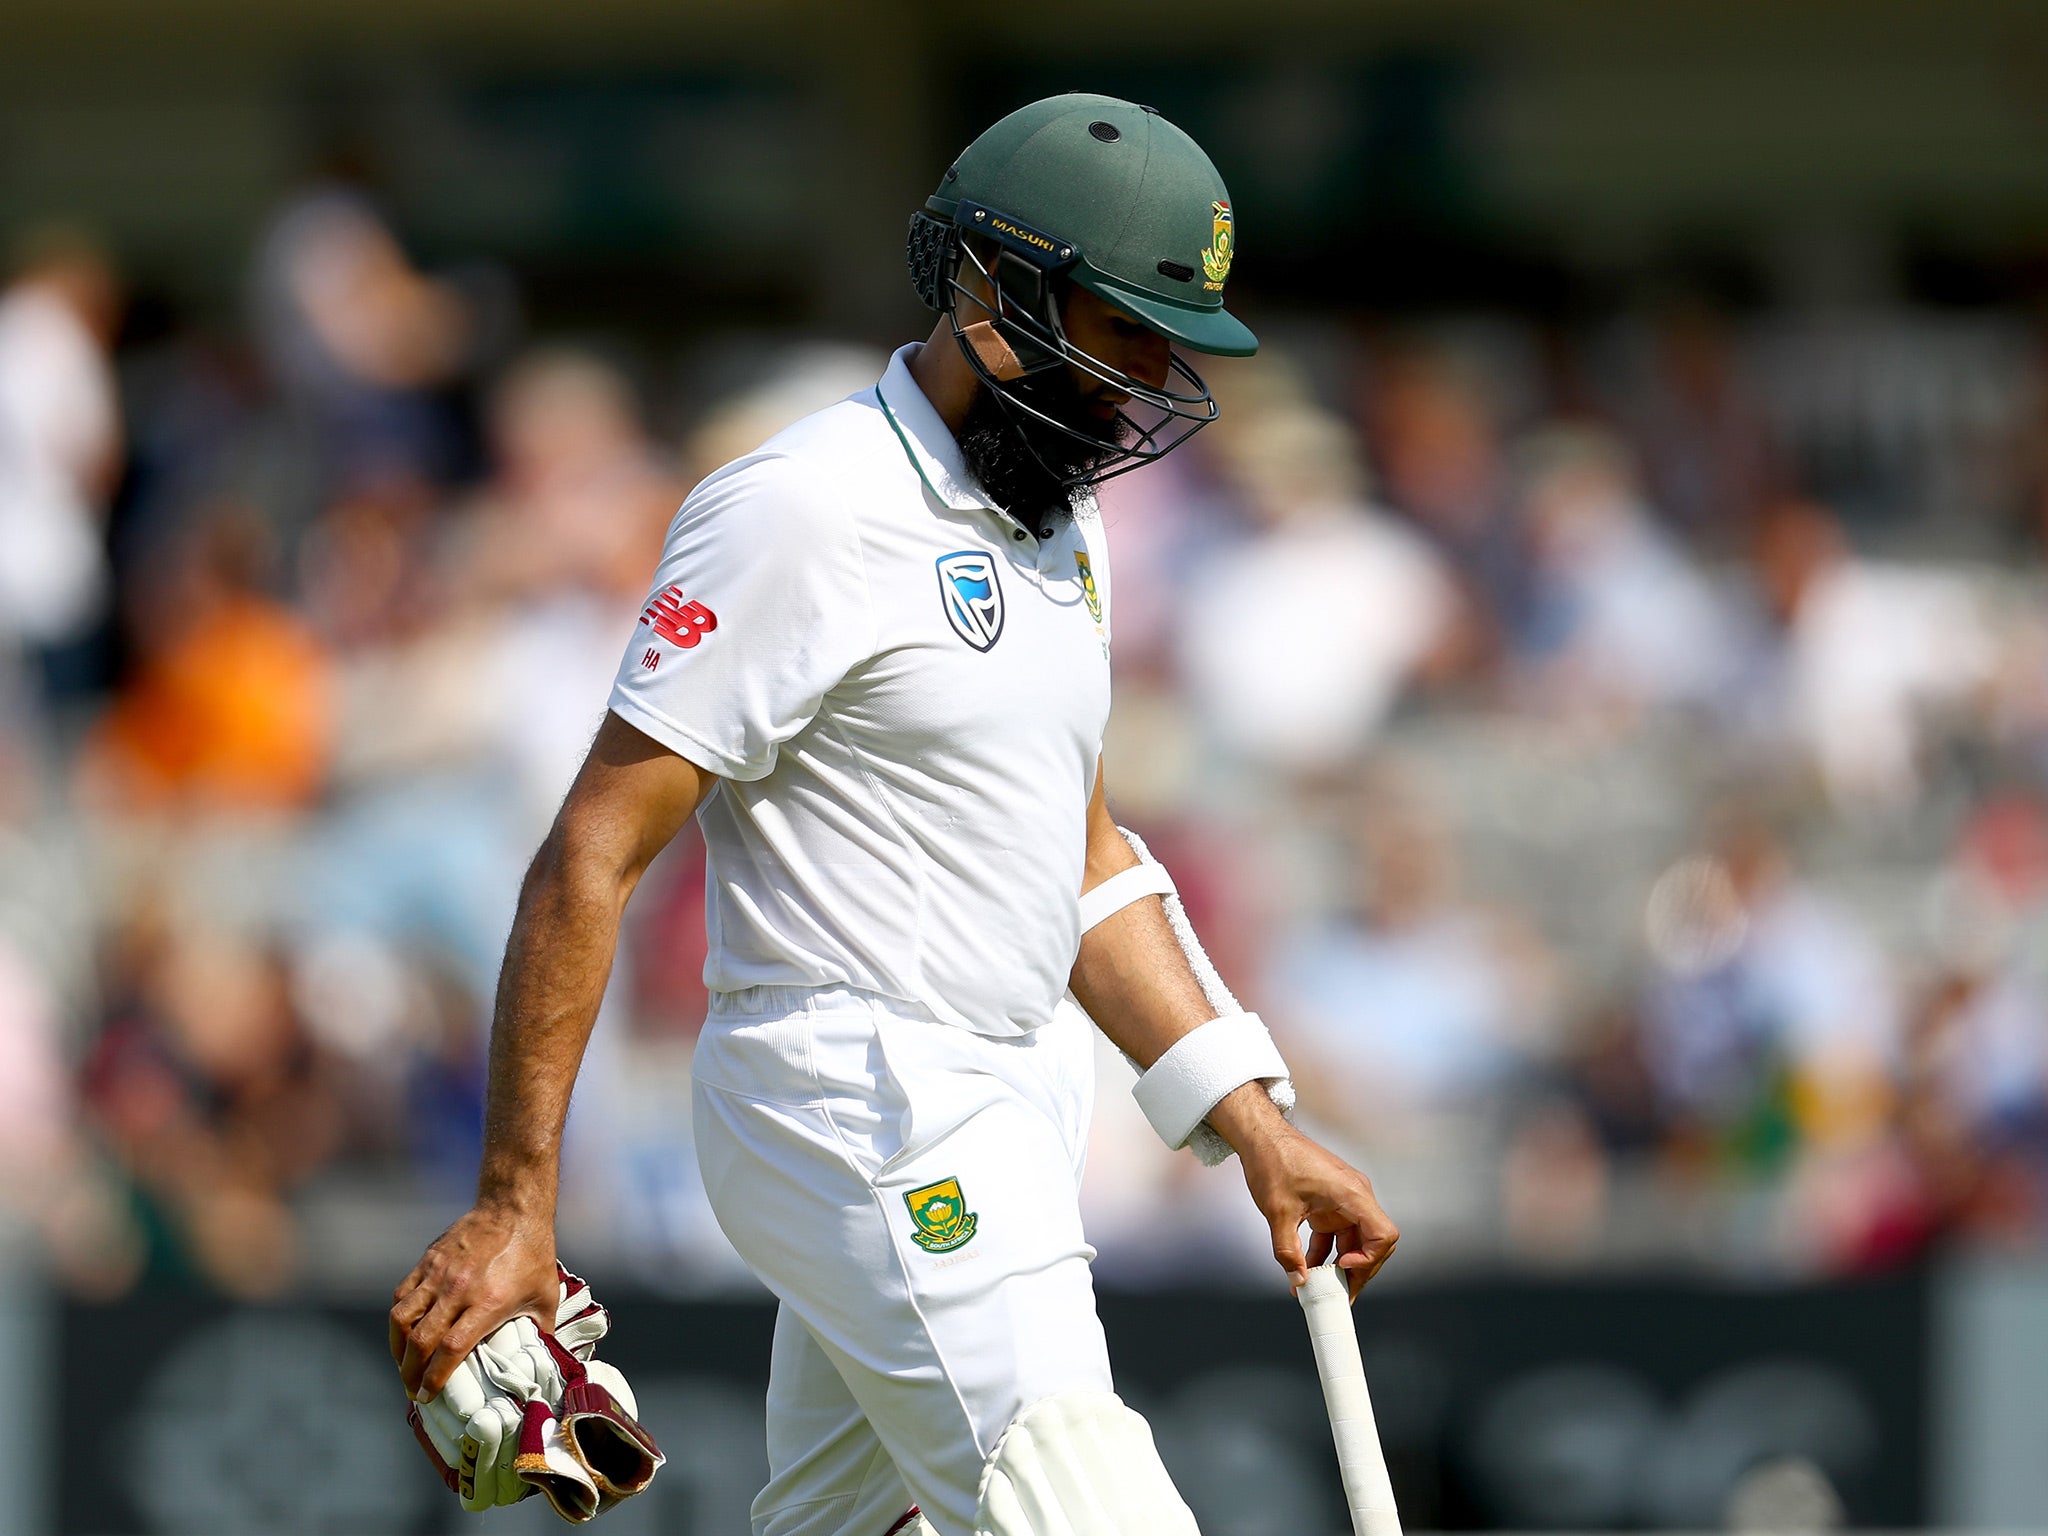 South Africa have rarely looked as weak as they did in their collapse at Lord's on Sunday